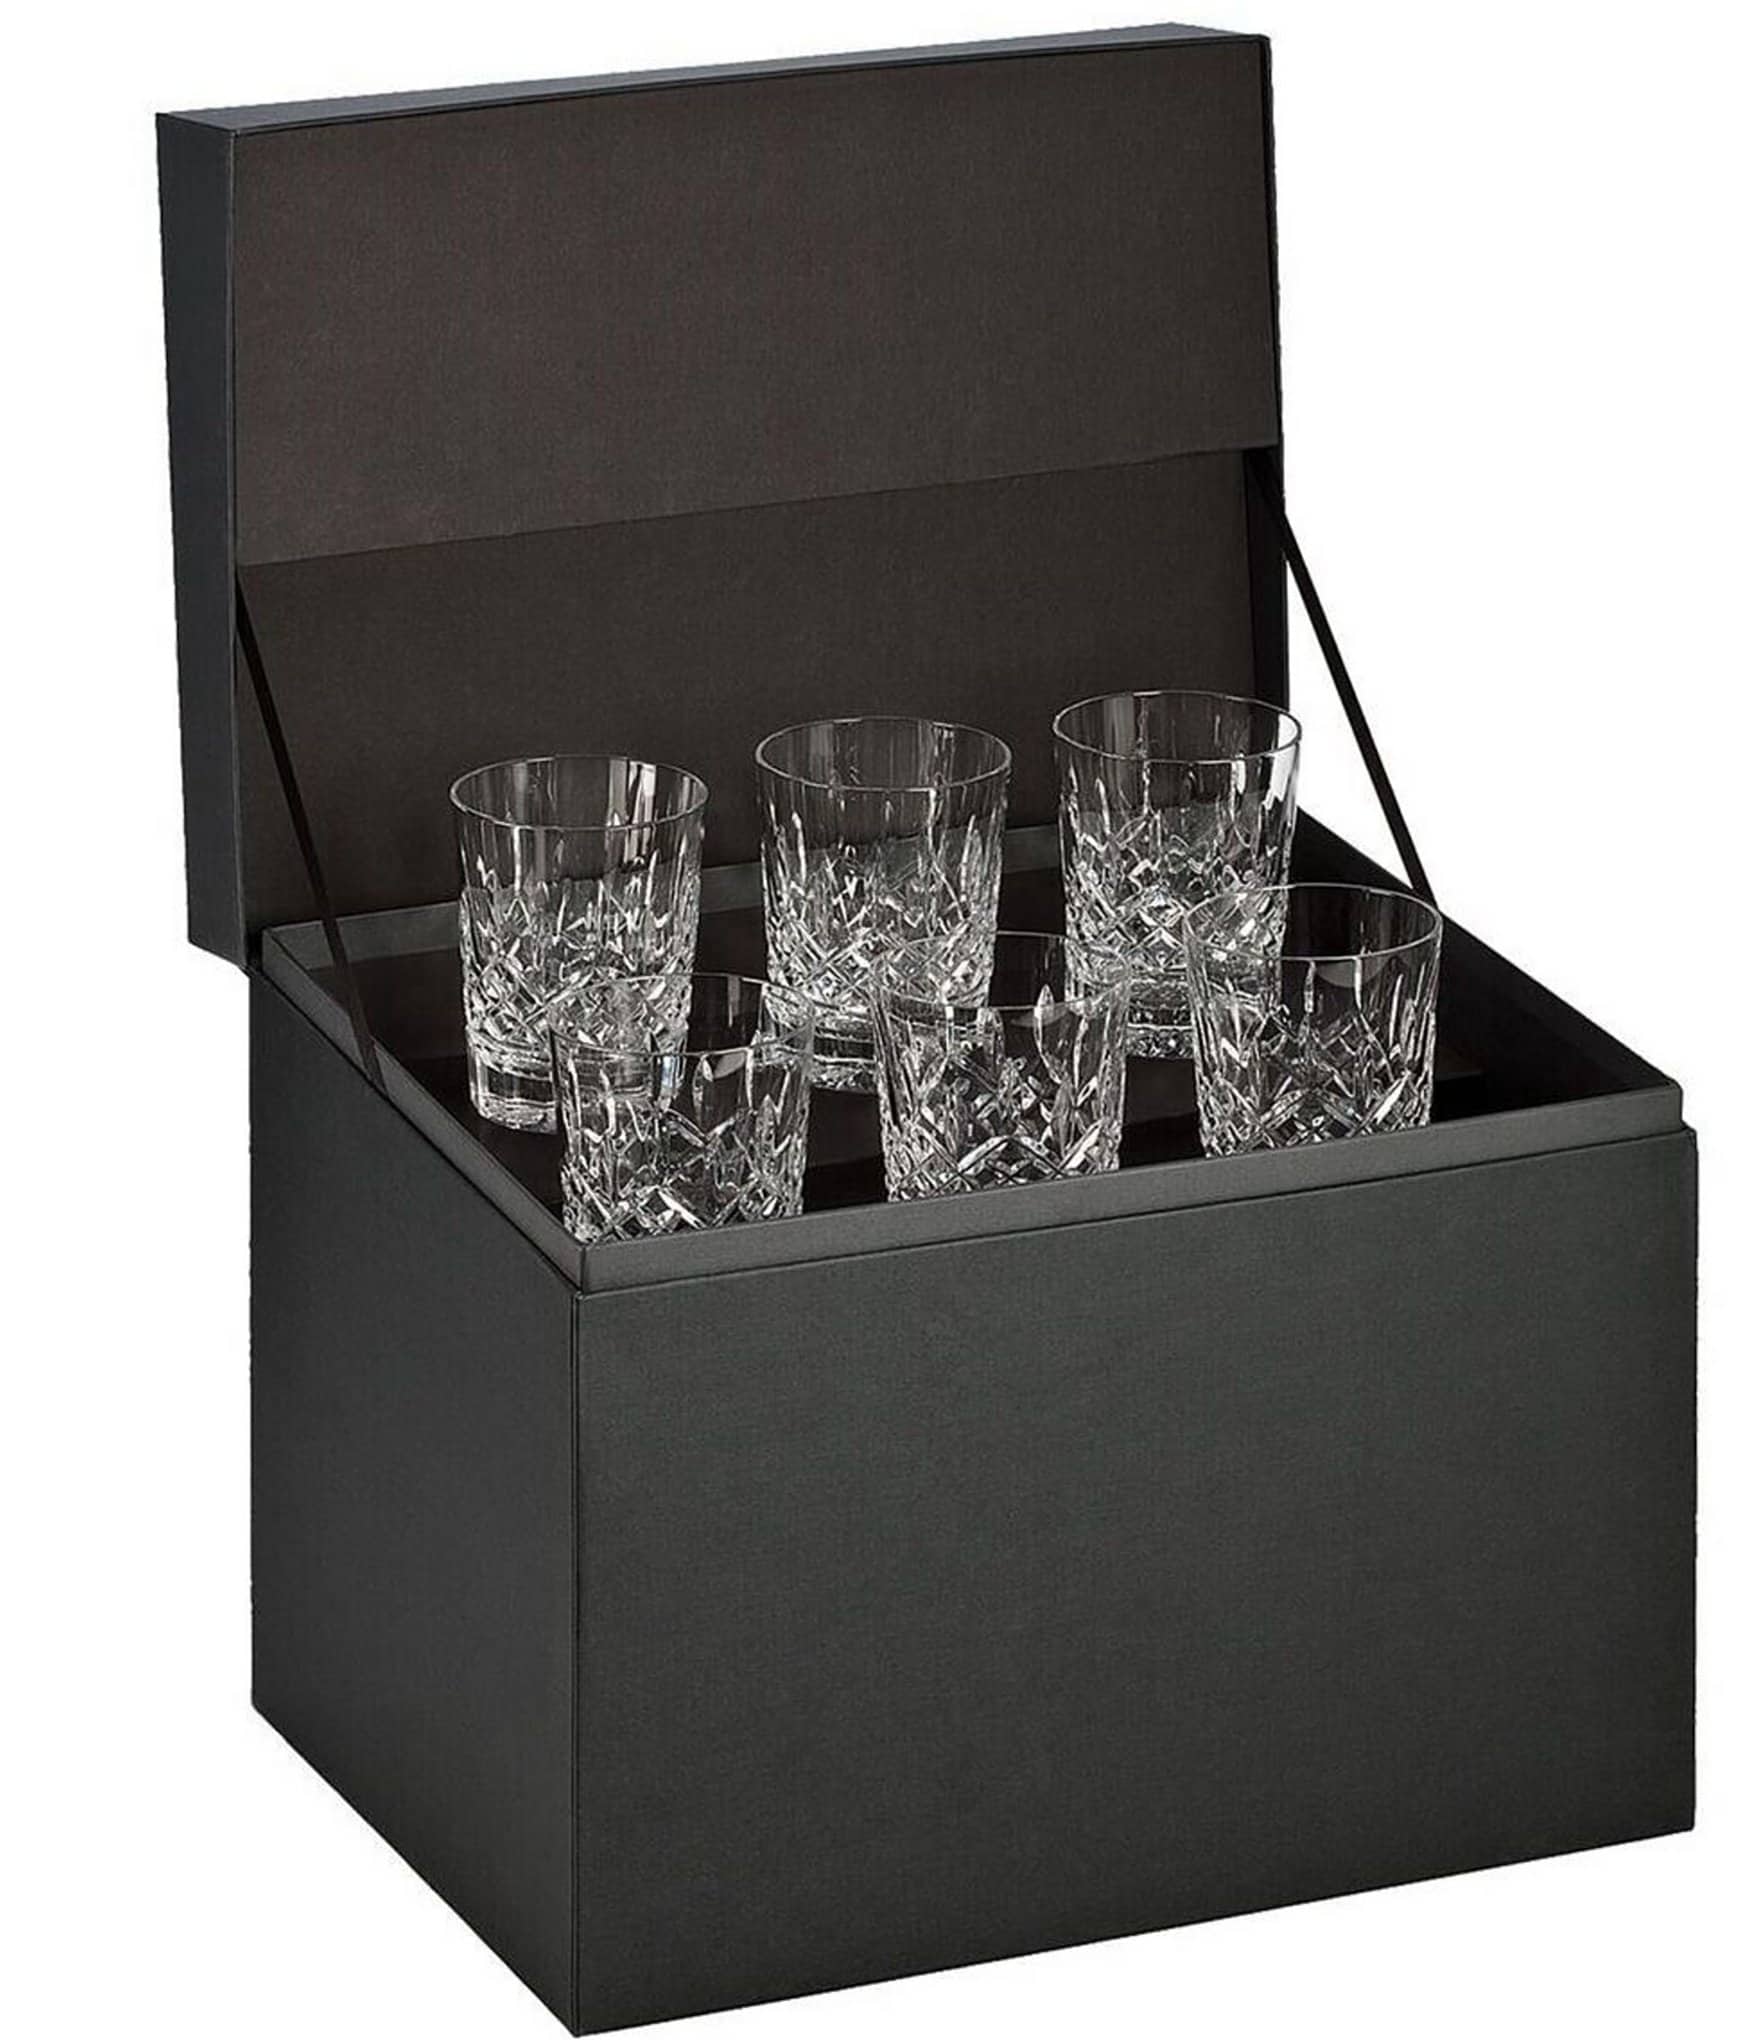 Waterford Crystal Elegance Collection - Boxed Set of Two Lager Glasses